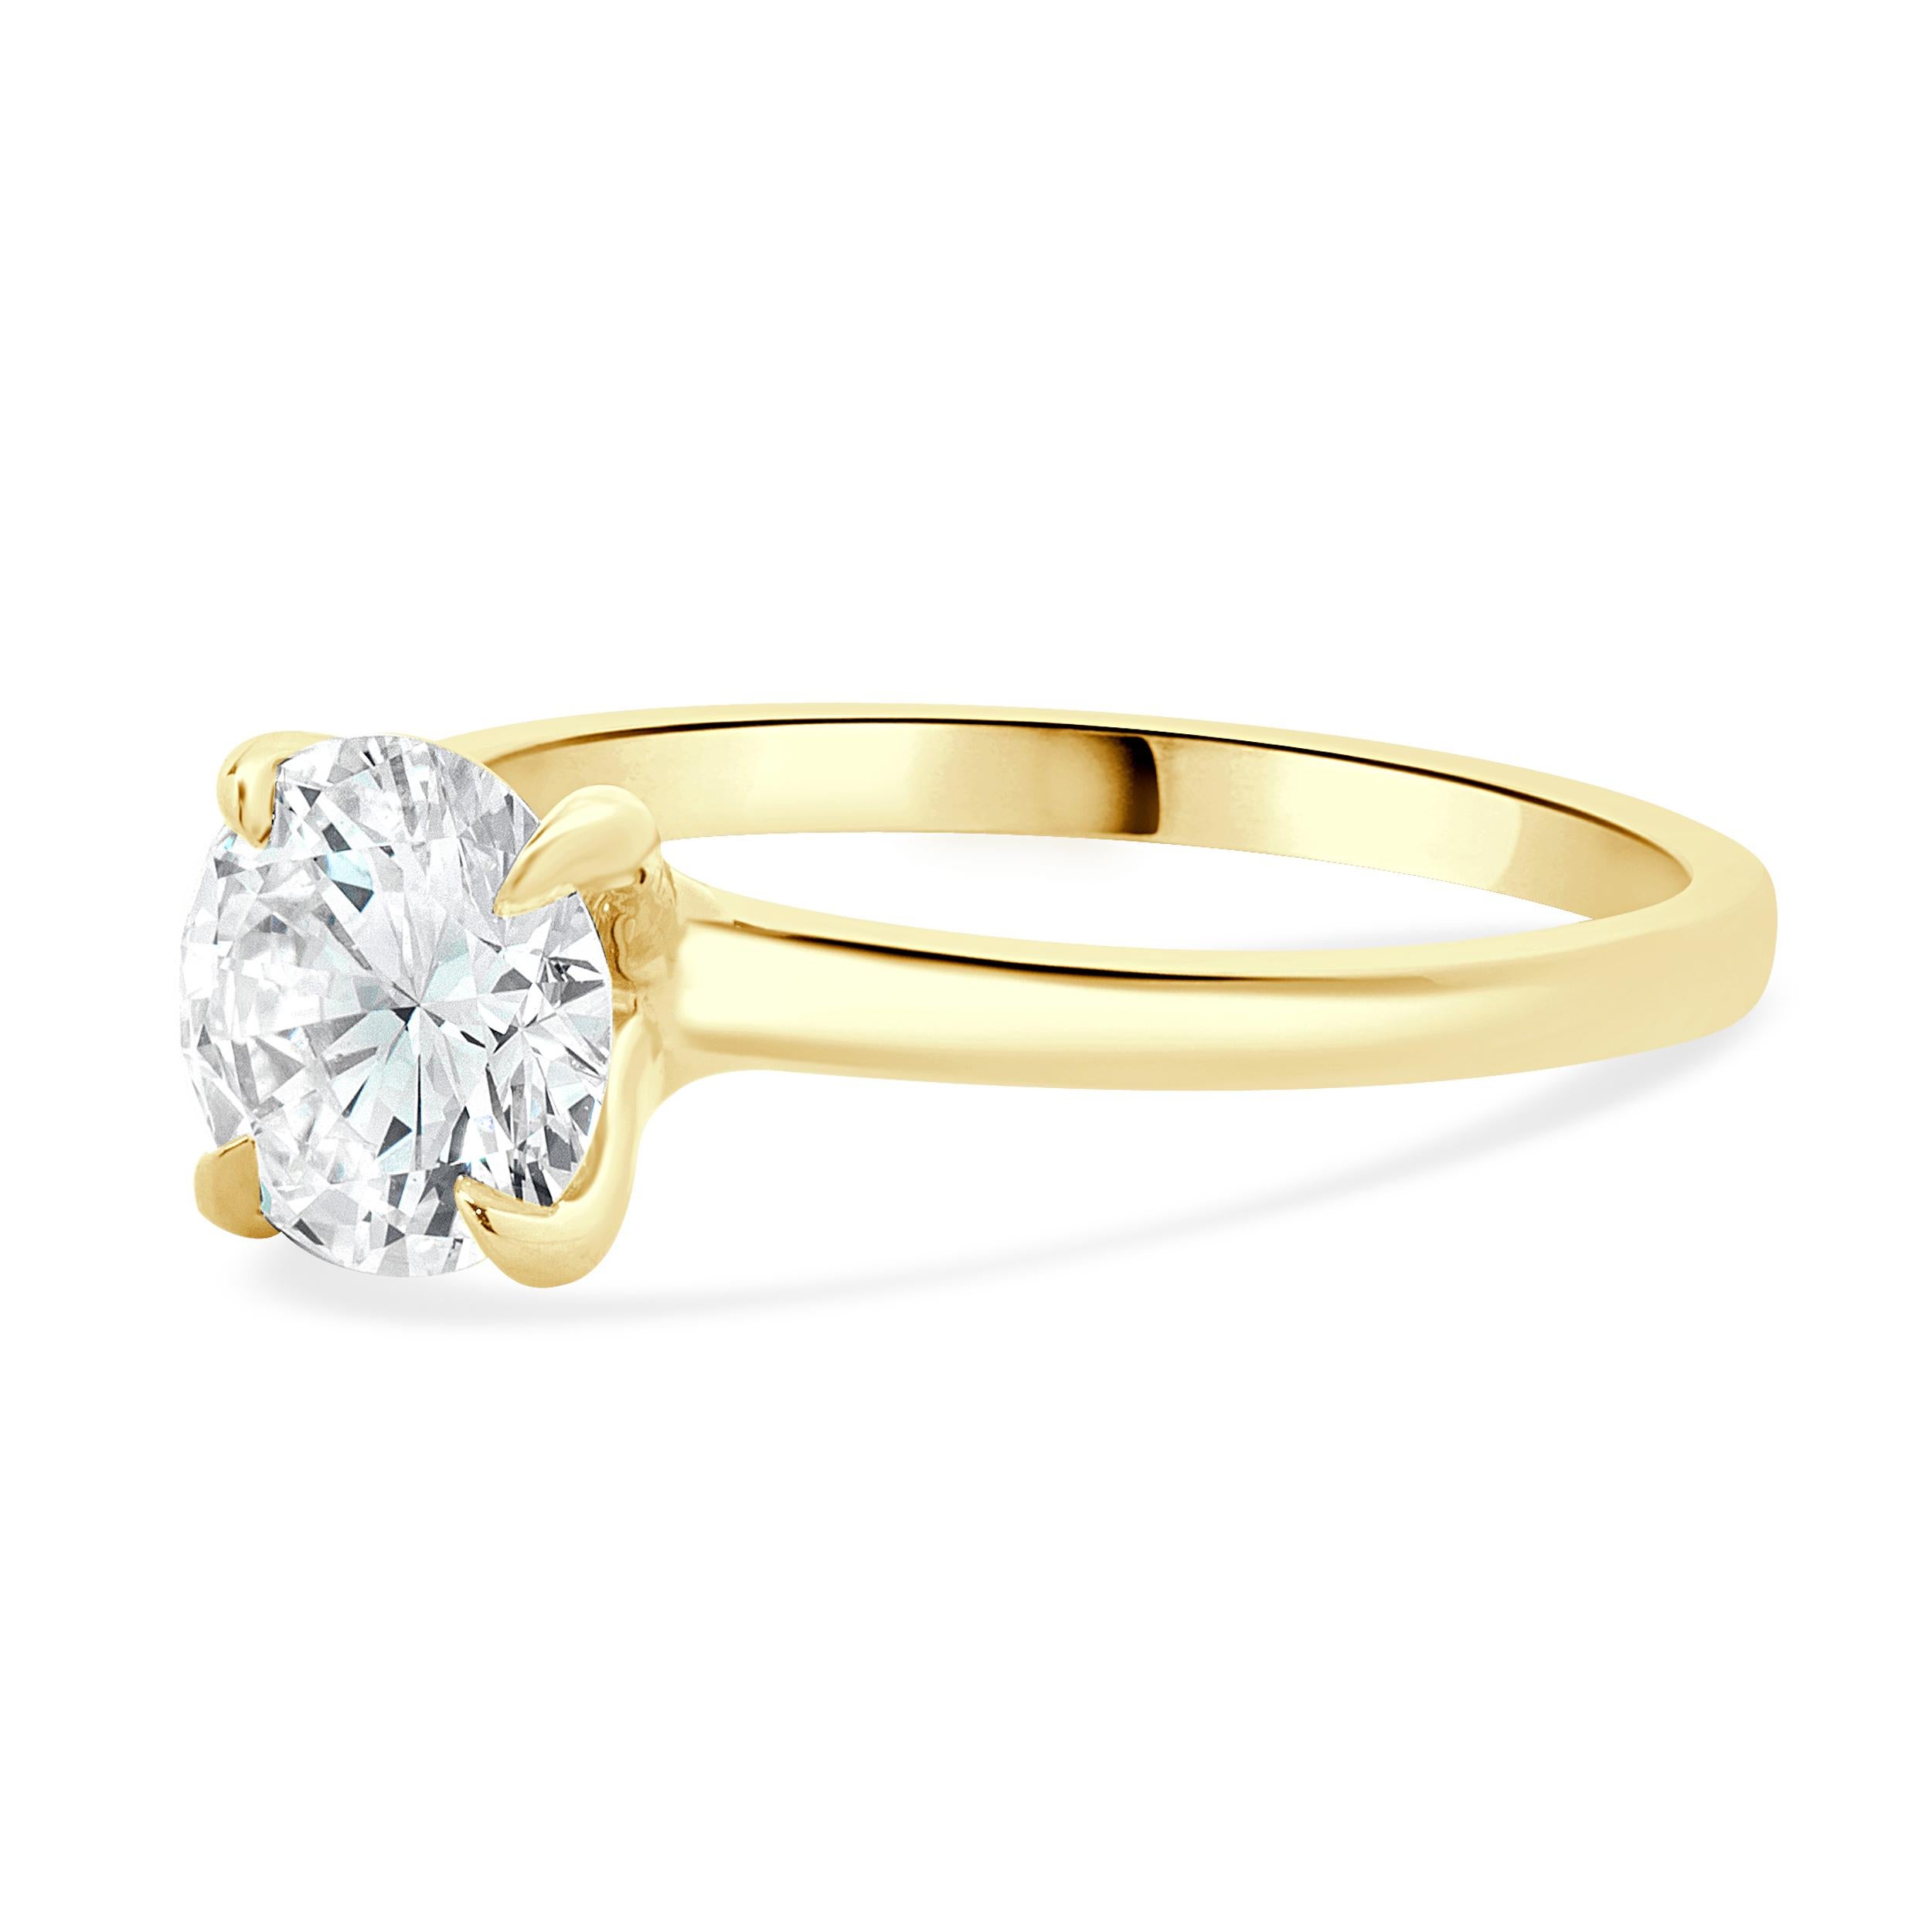 Designer: Custom
Material: 14K yellow gold
Diamond: 1 round brilliant cut = 1.06ct
Color: G
Clarity: VS1
GIA: 2235059617
Dimensions: ring top measures 1.8mm wide
Ring Size: 6.5 (complimentary sizing available)
Weight: 2.35 grams
